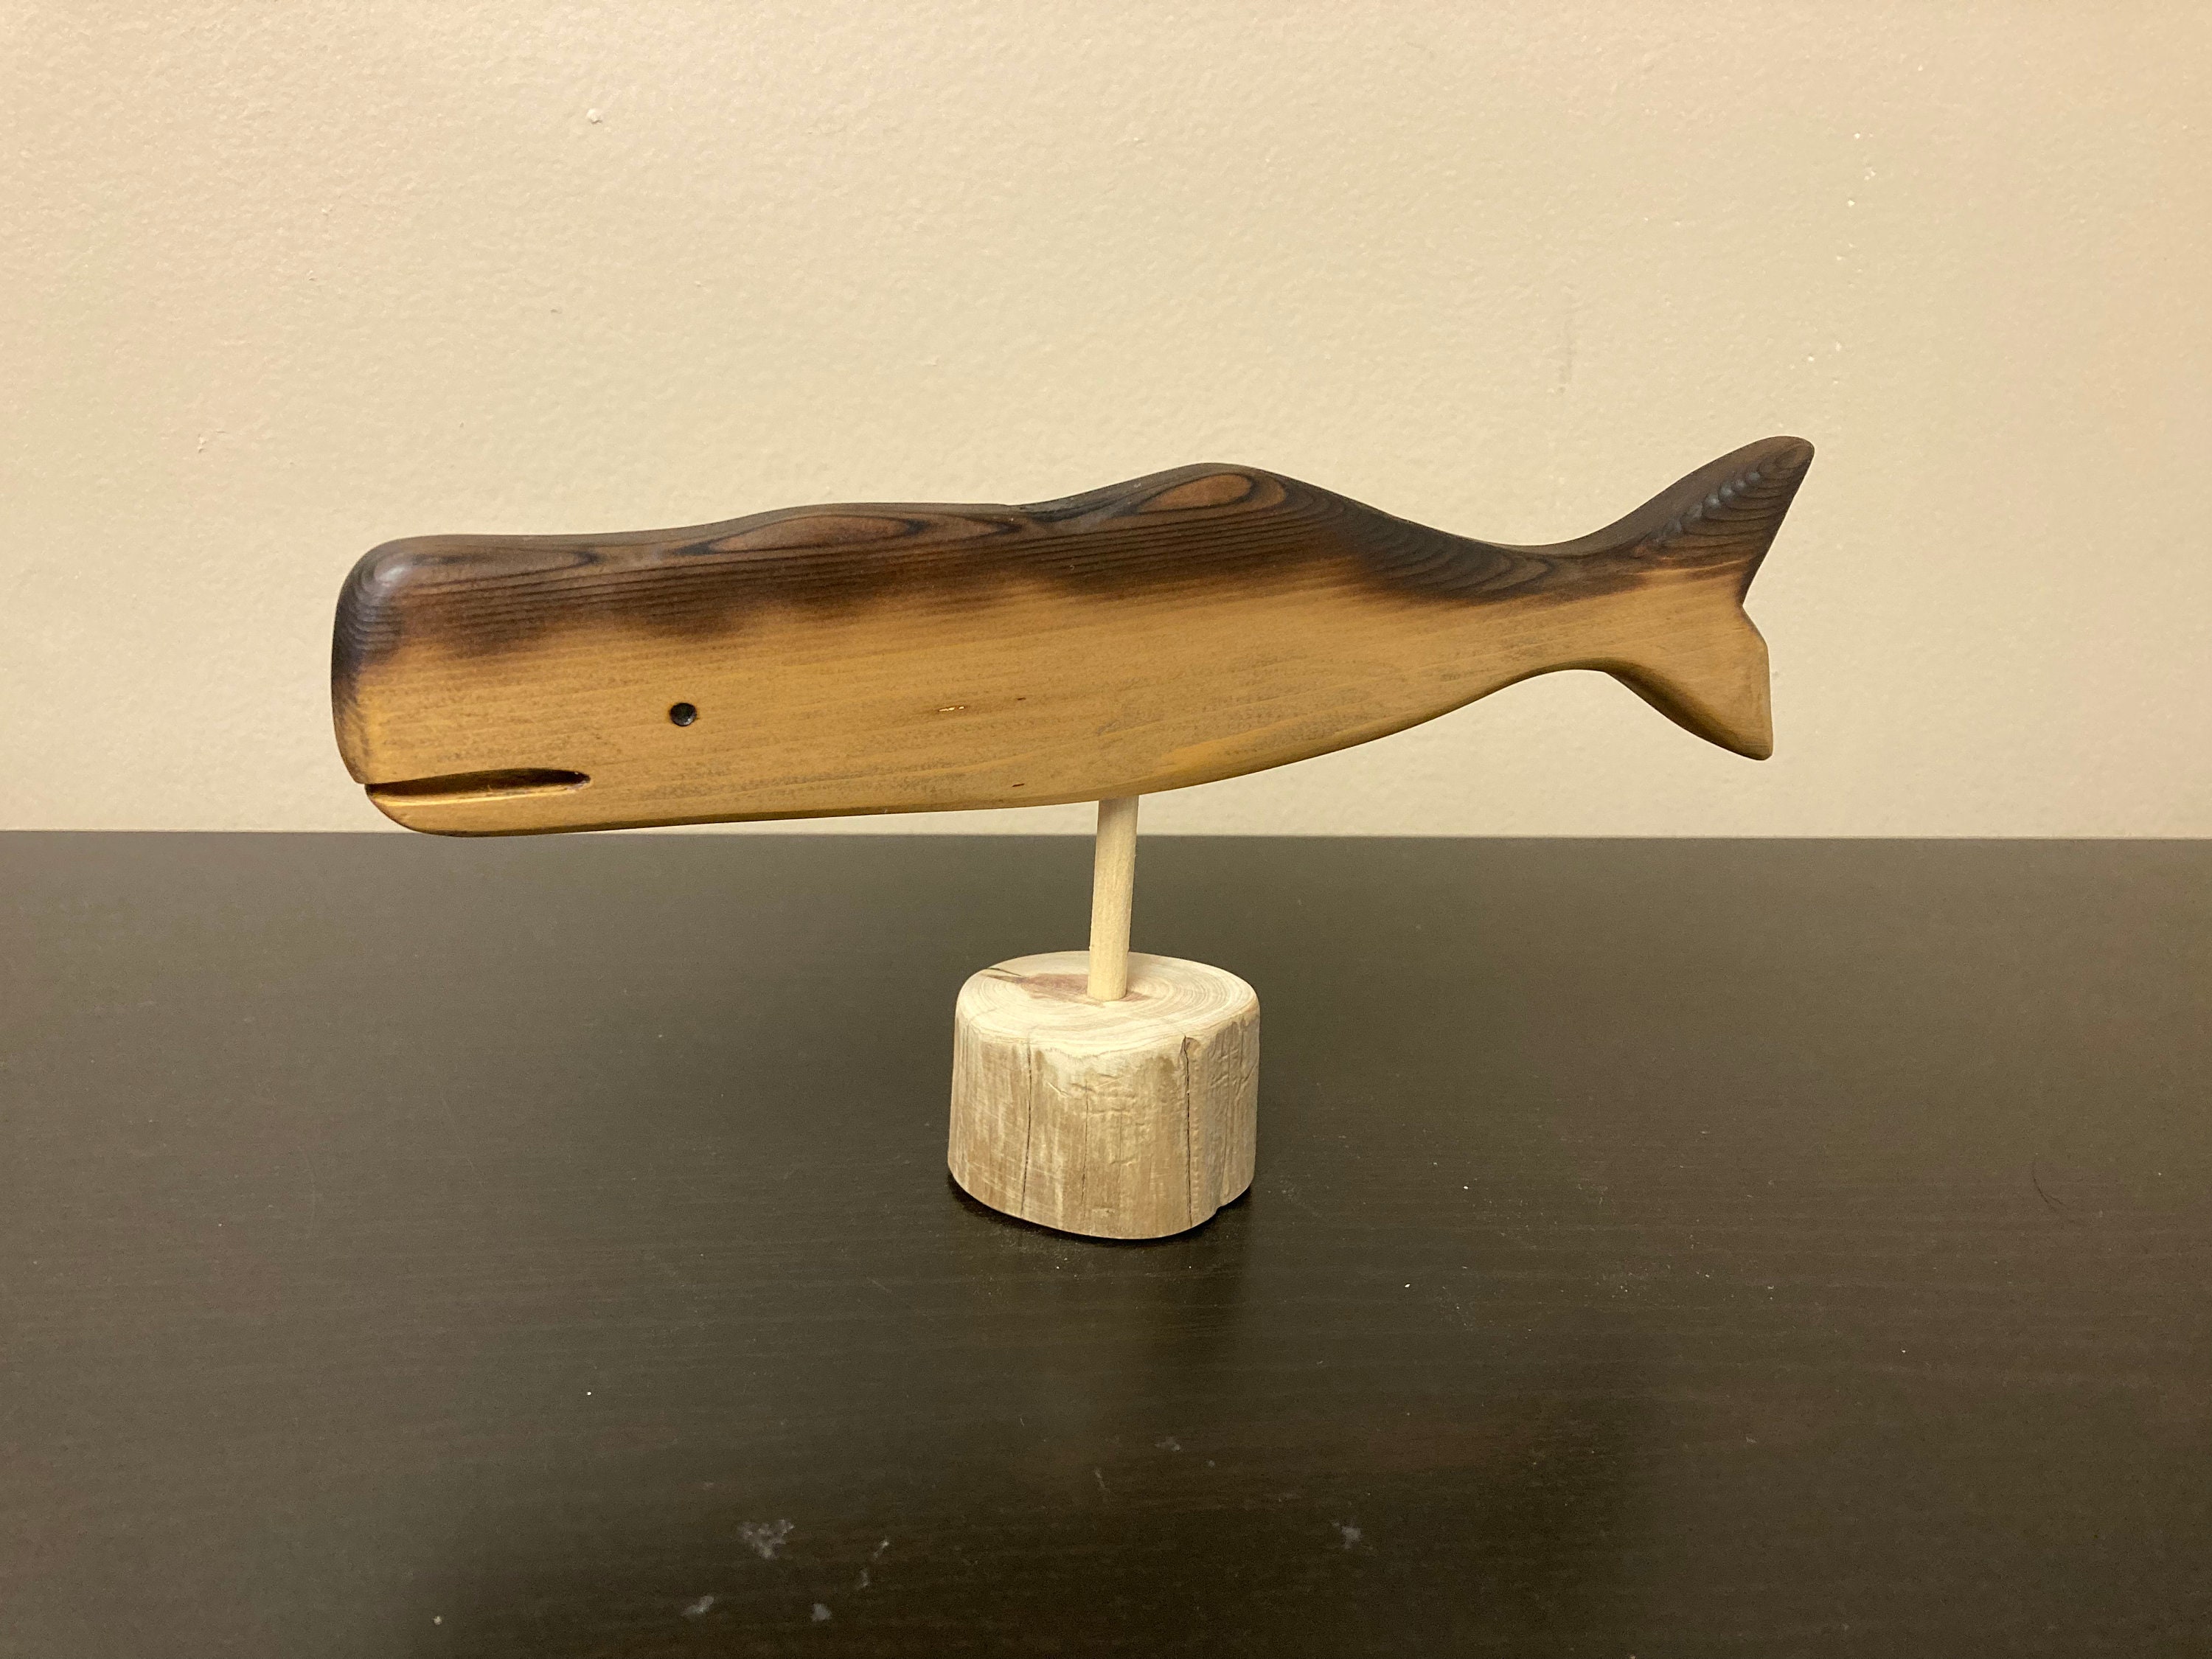 Wood Whale Carving on Driftwood Stand ~ Made of Cherry ~ Handcrafted Nautical Folk Art